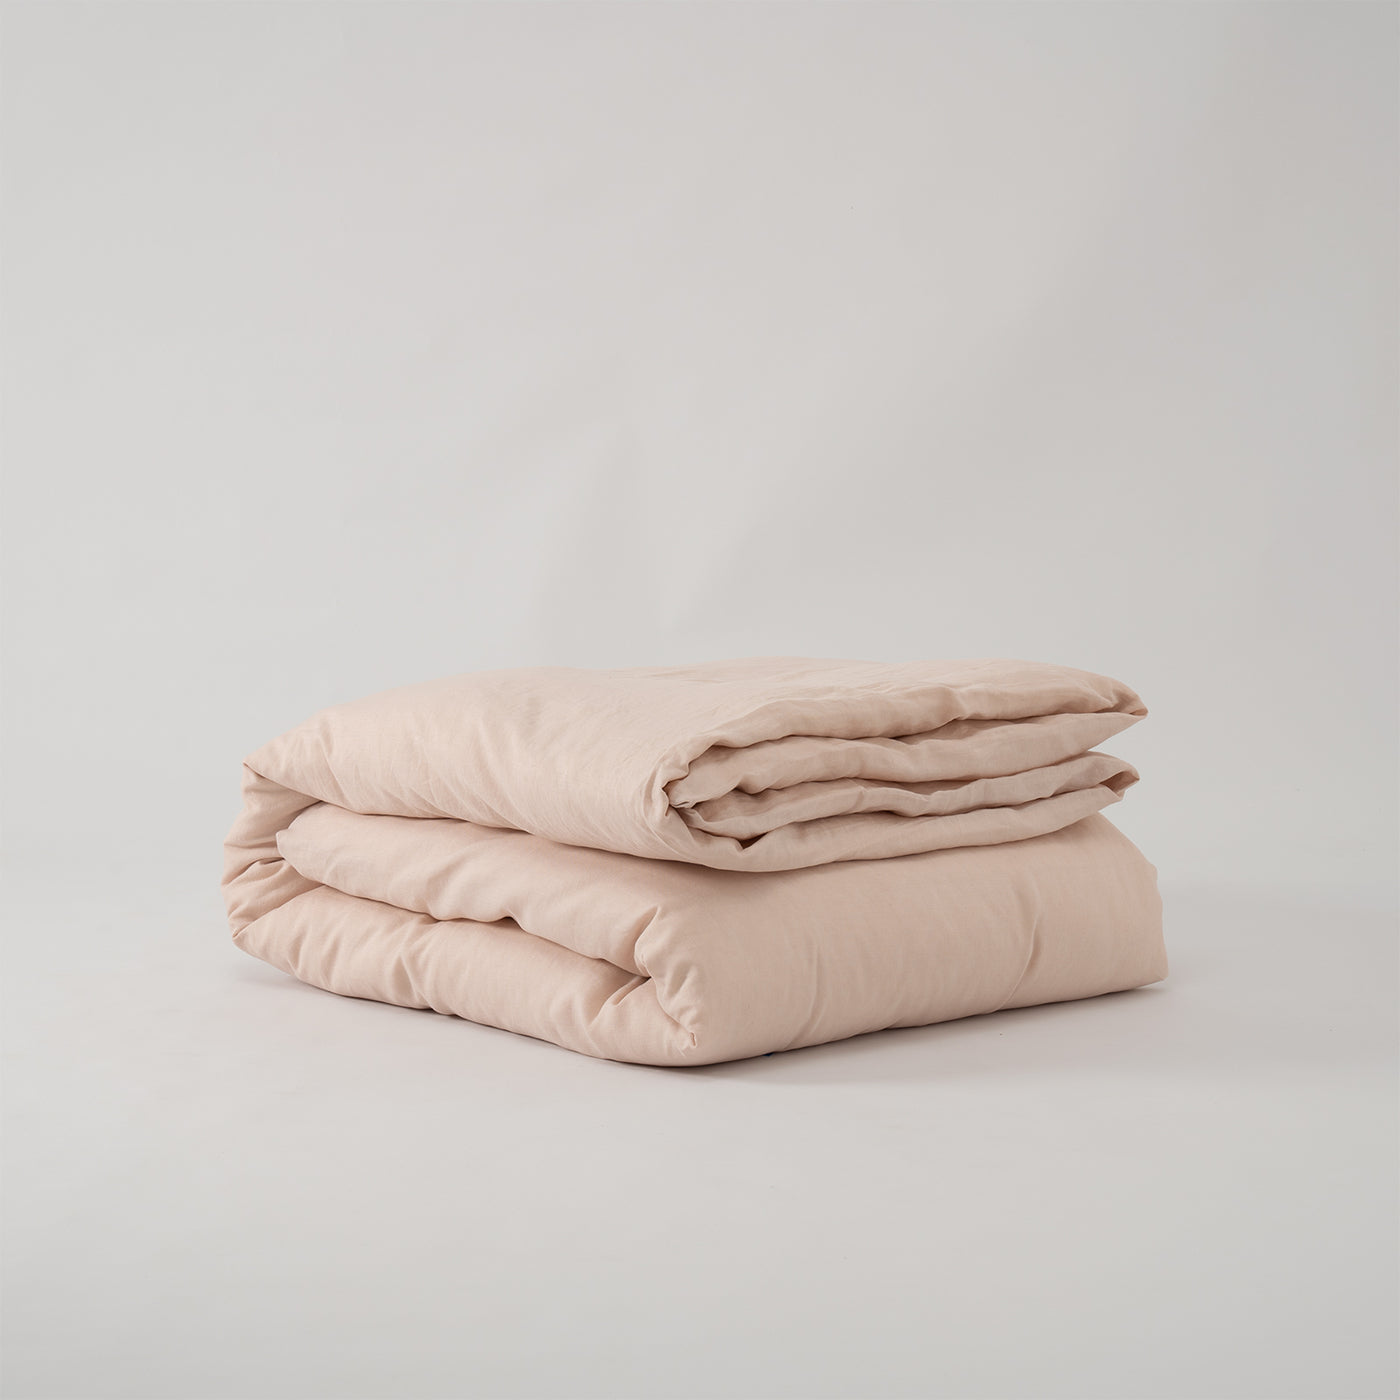 French Flax Linen Quilt Cover in Blush